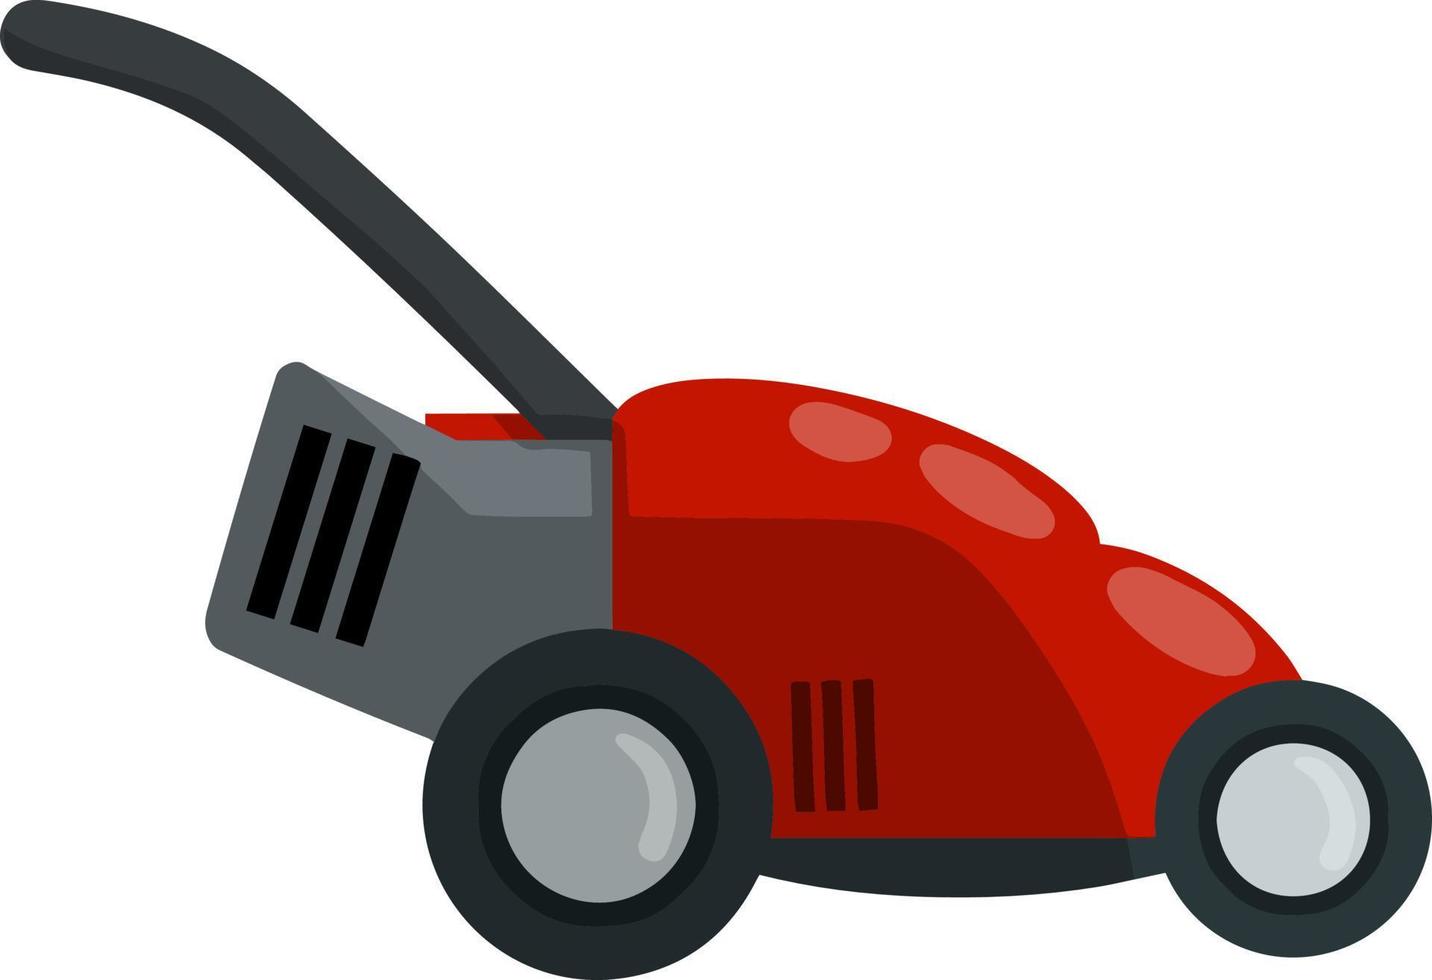 Lawnmower. Gardening machine. Flat illustration. trimmer with Gasoline engine. Element for mowing and caring for lawn and grass. Modern model vector